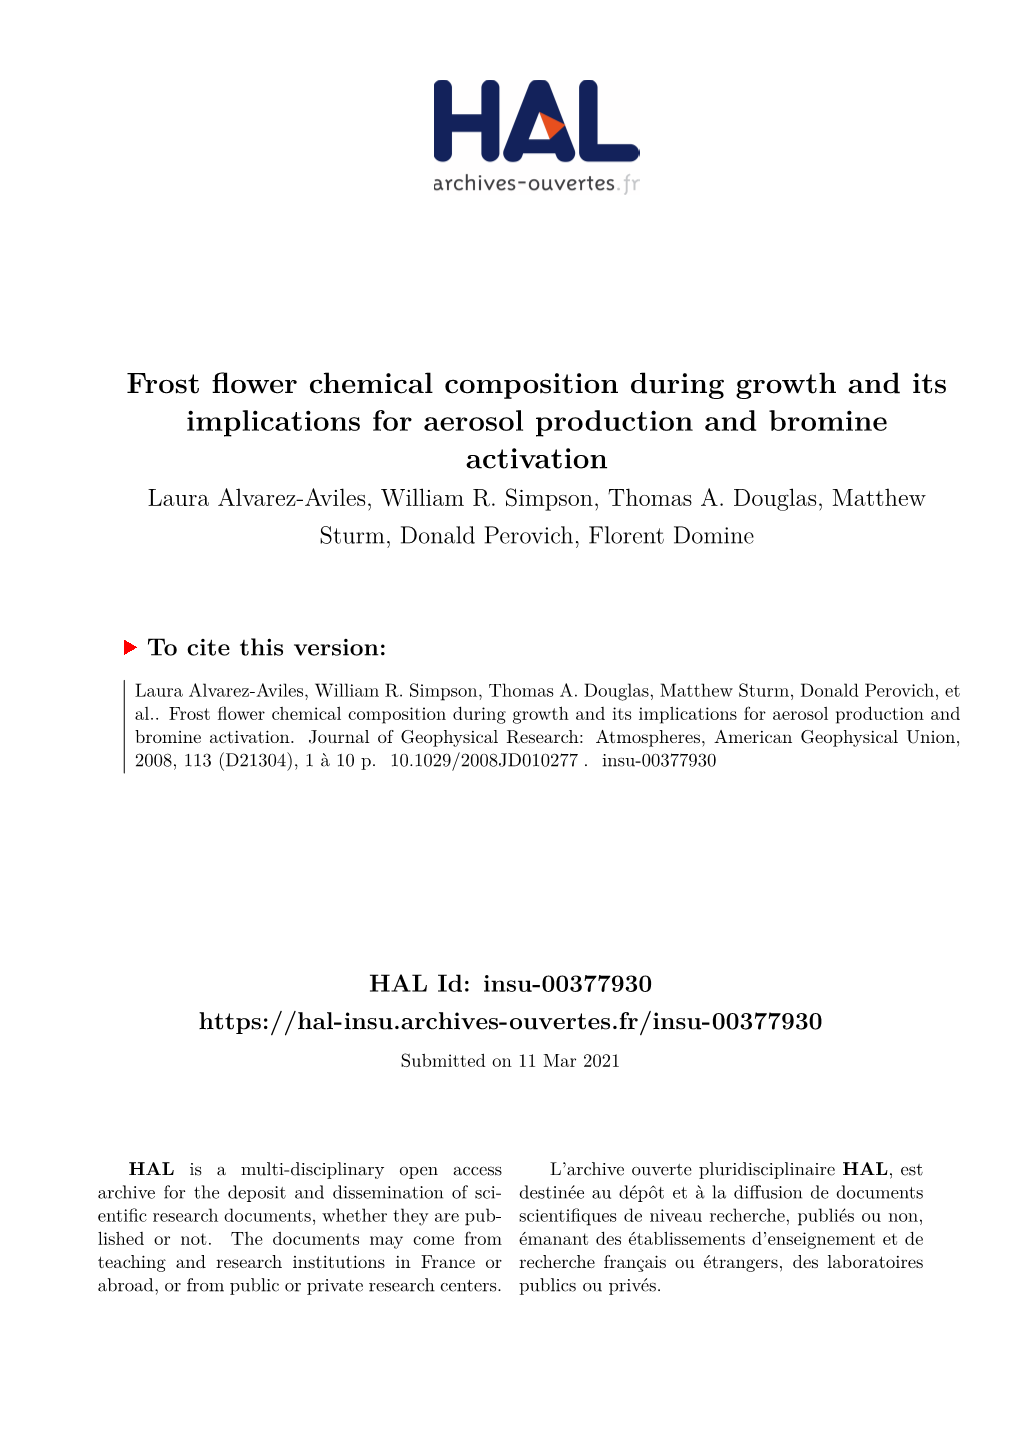 Frost Flower Chemical Composition During Growth and Its Implications for Aerosol Production and Bromine Activation Laura Alvarez-Aviles, William R